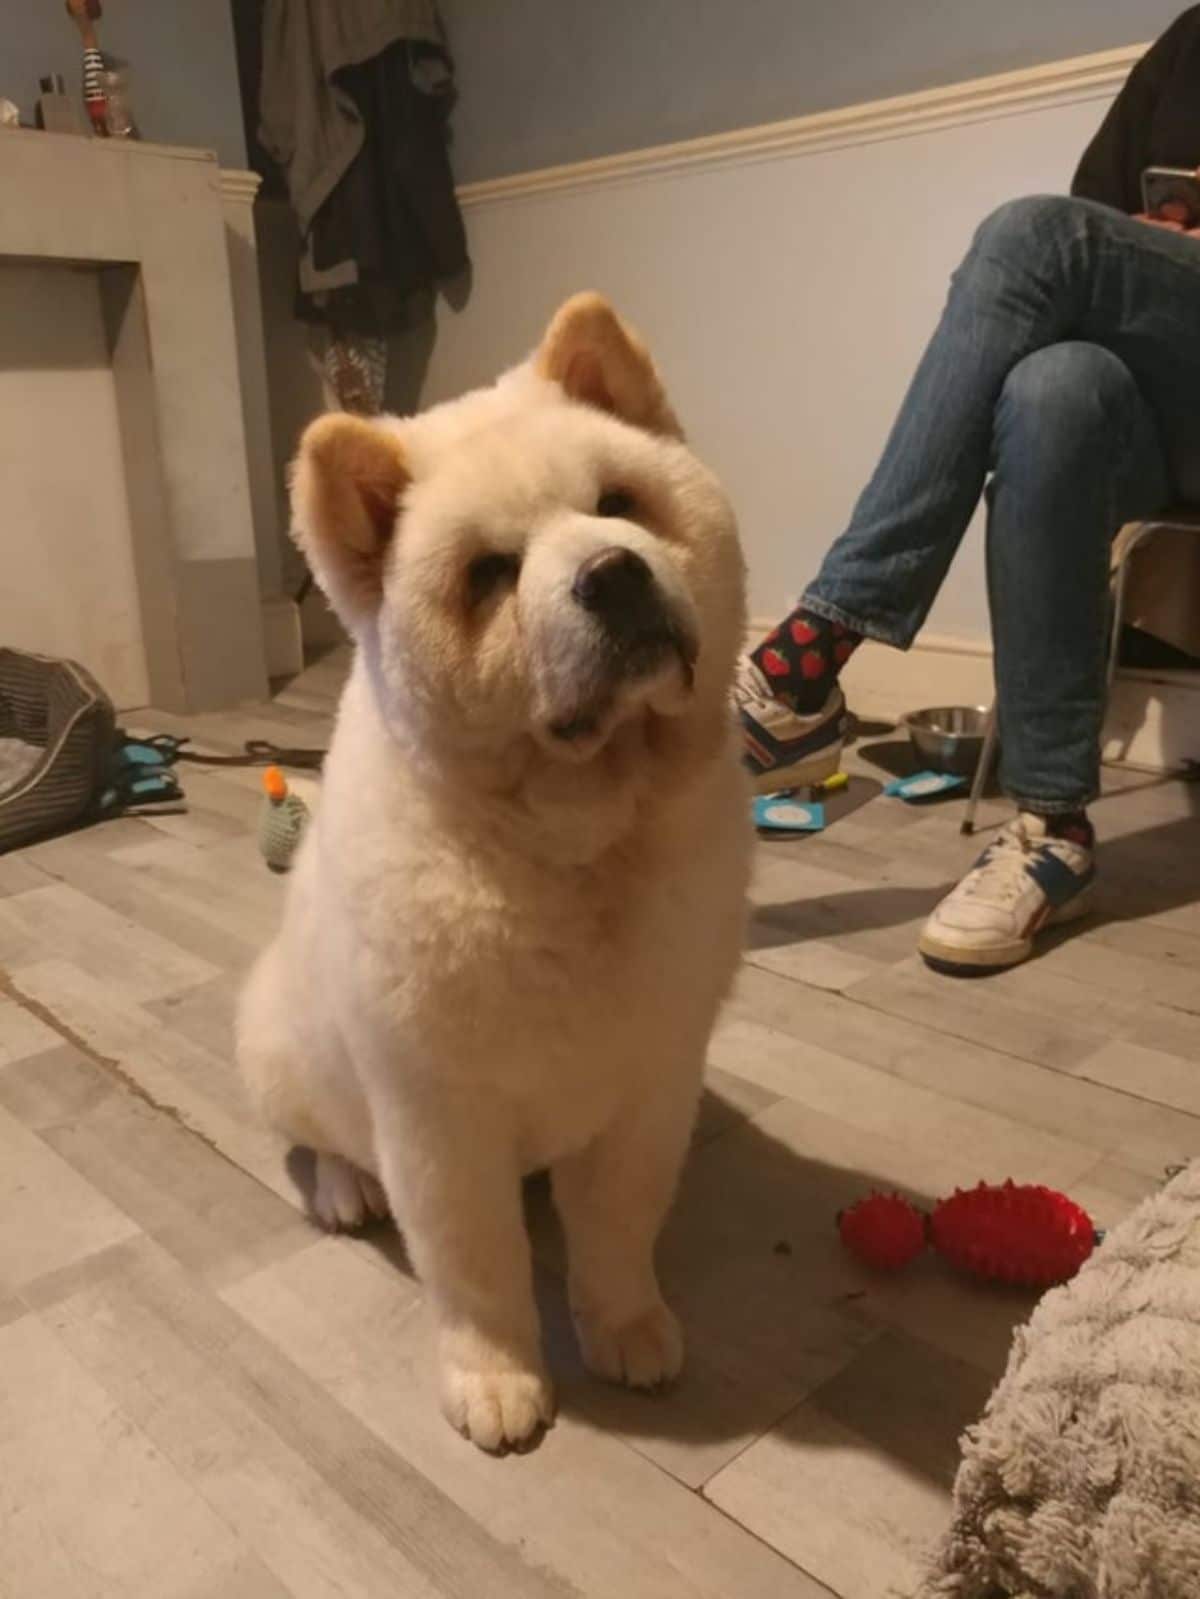 brown chow chow sitting on a wooden floor next to someone's feet